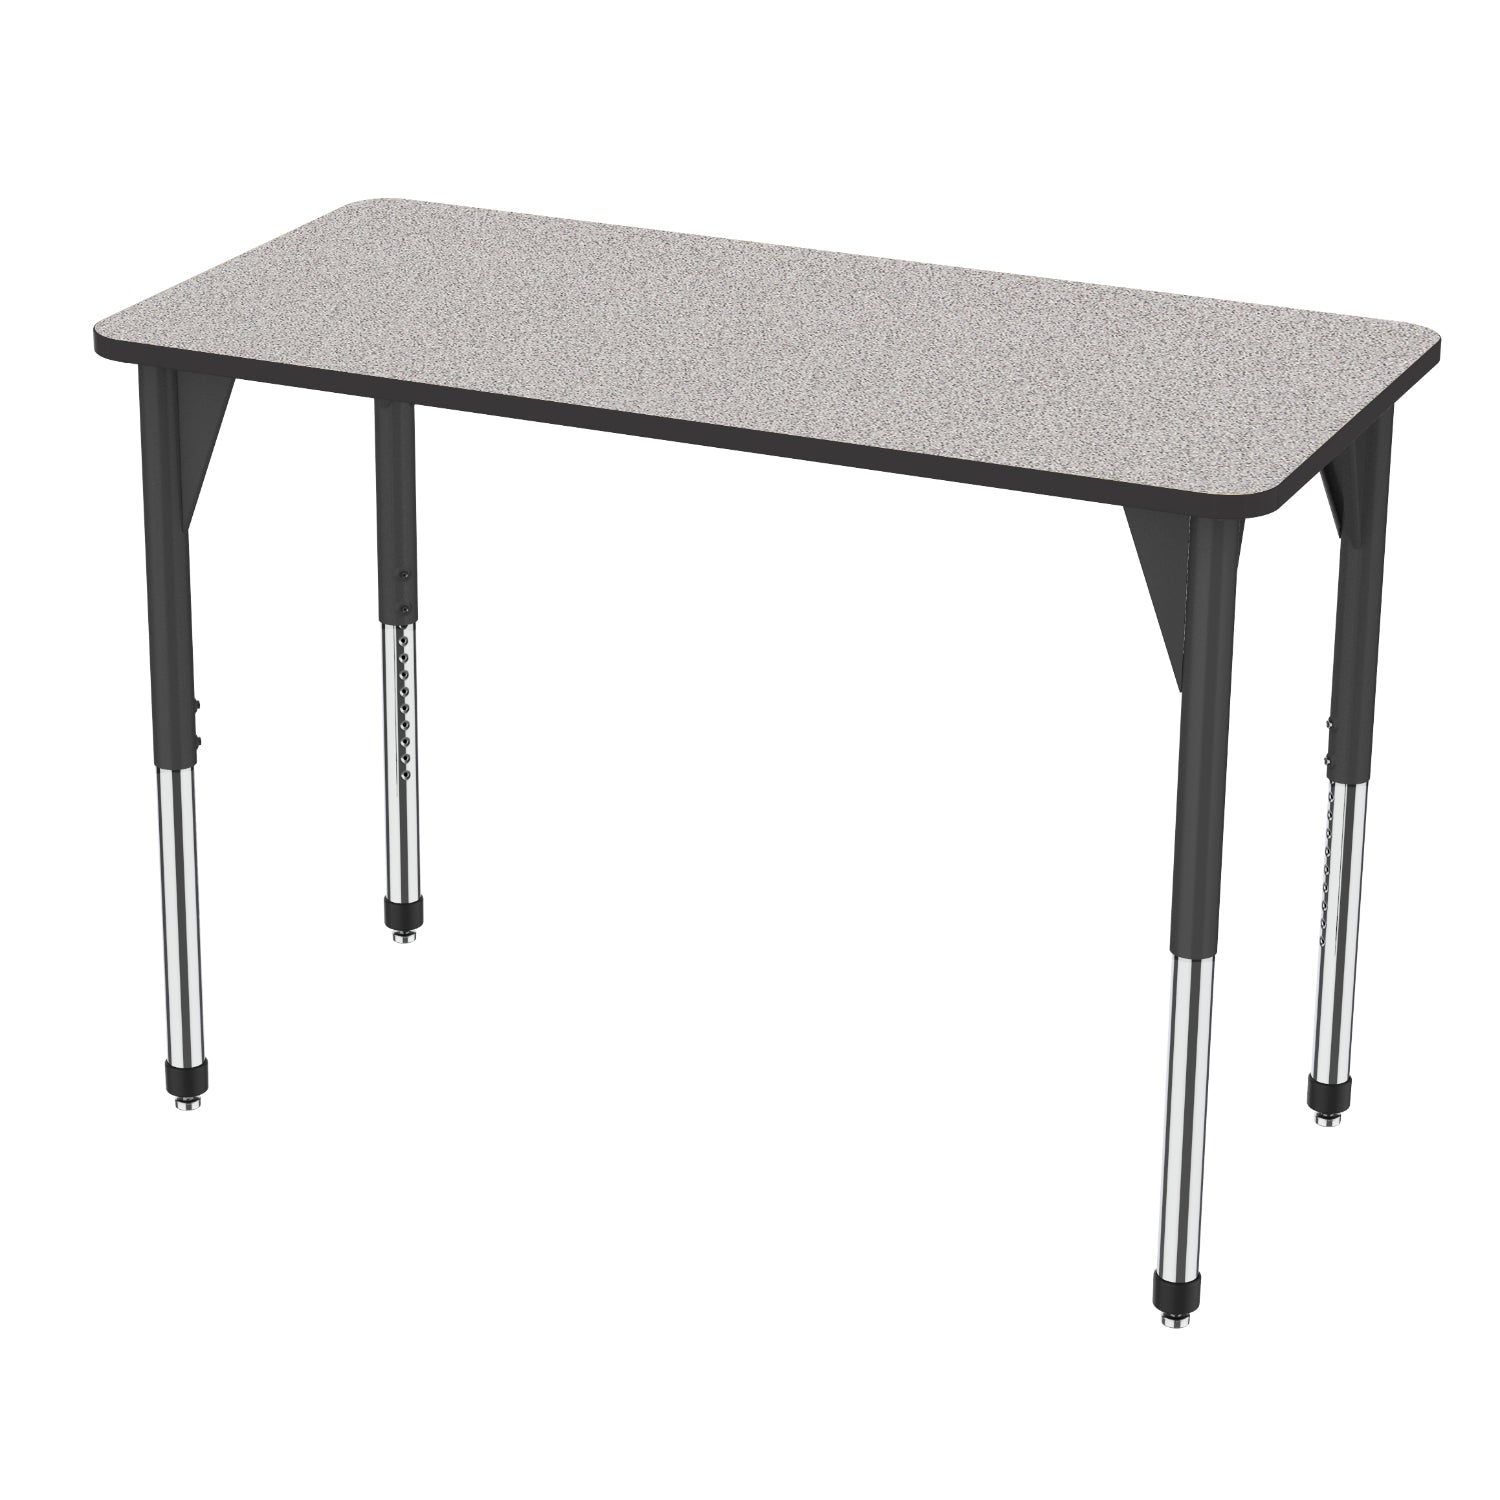 Premier Standing Height Collaborative Classroom Table, 30" x 60" Rectangle